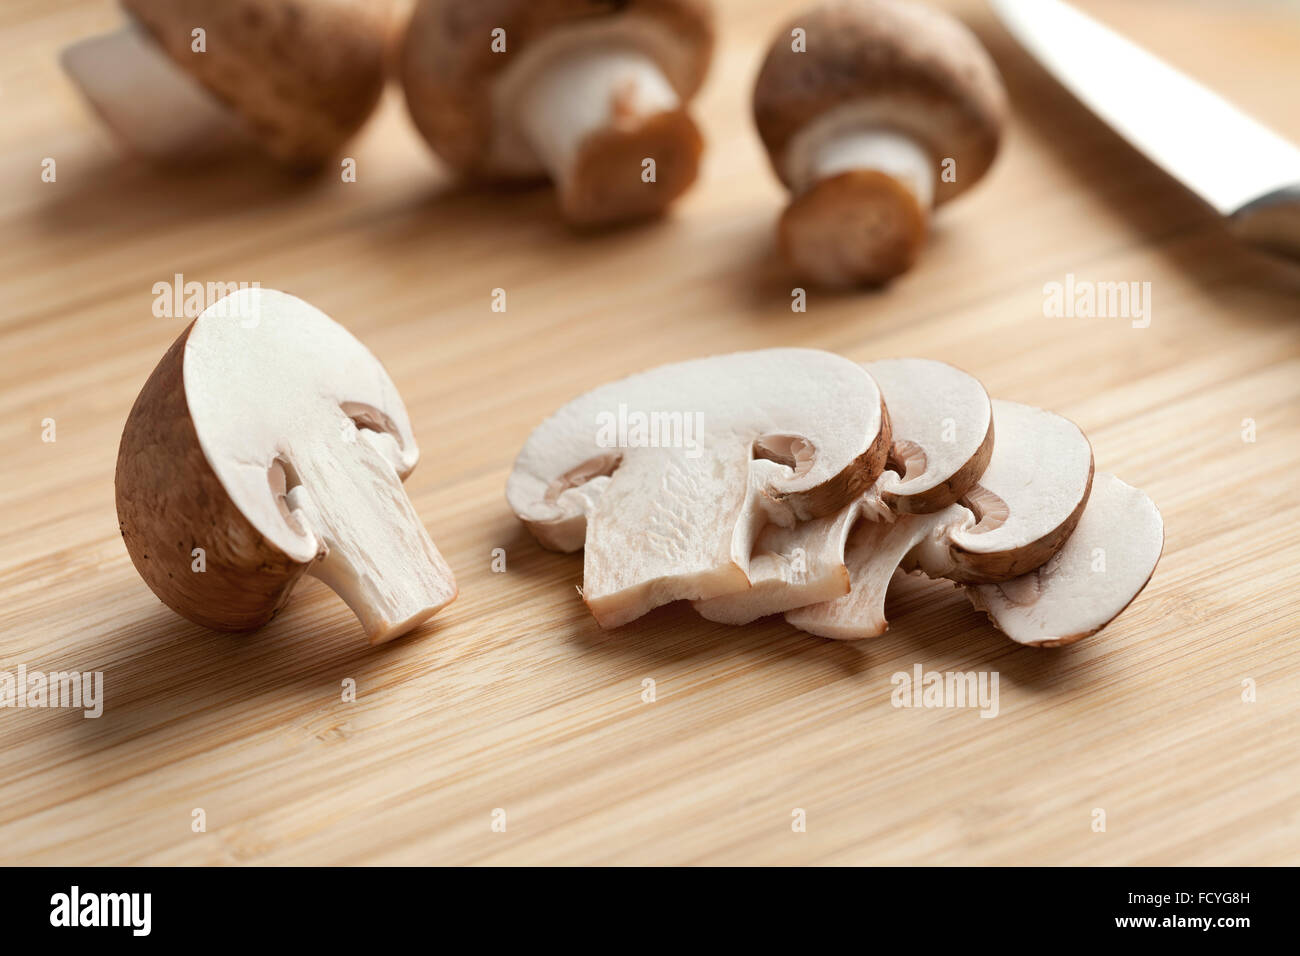 Fresh chestnut mushrooms slices on the cutting board Stock Photo